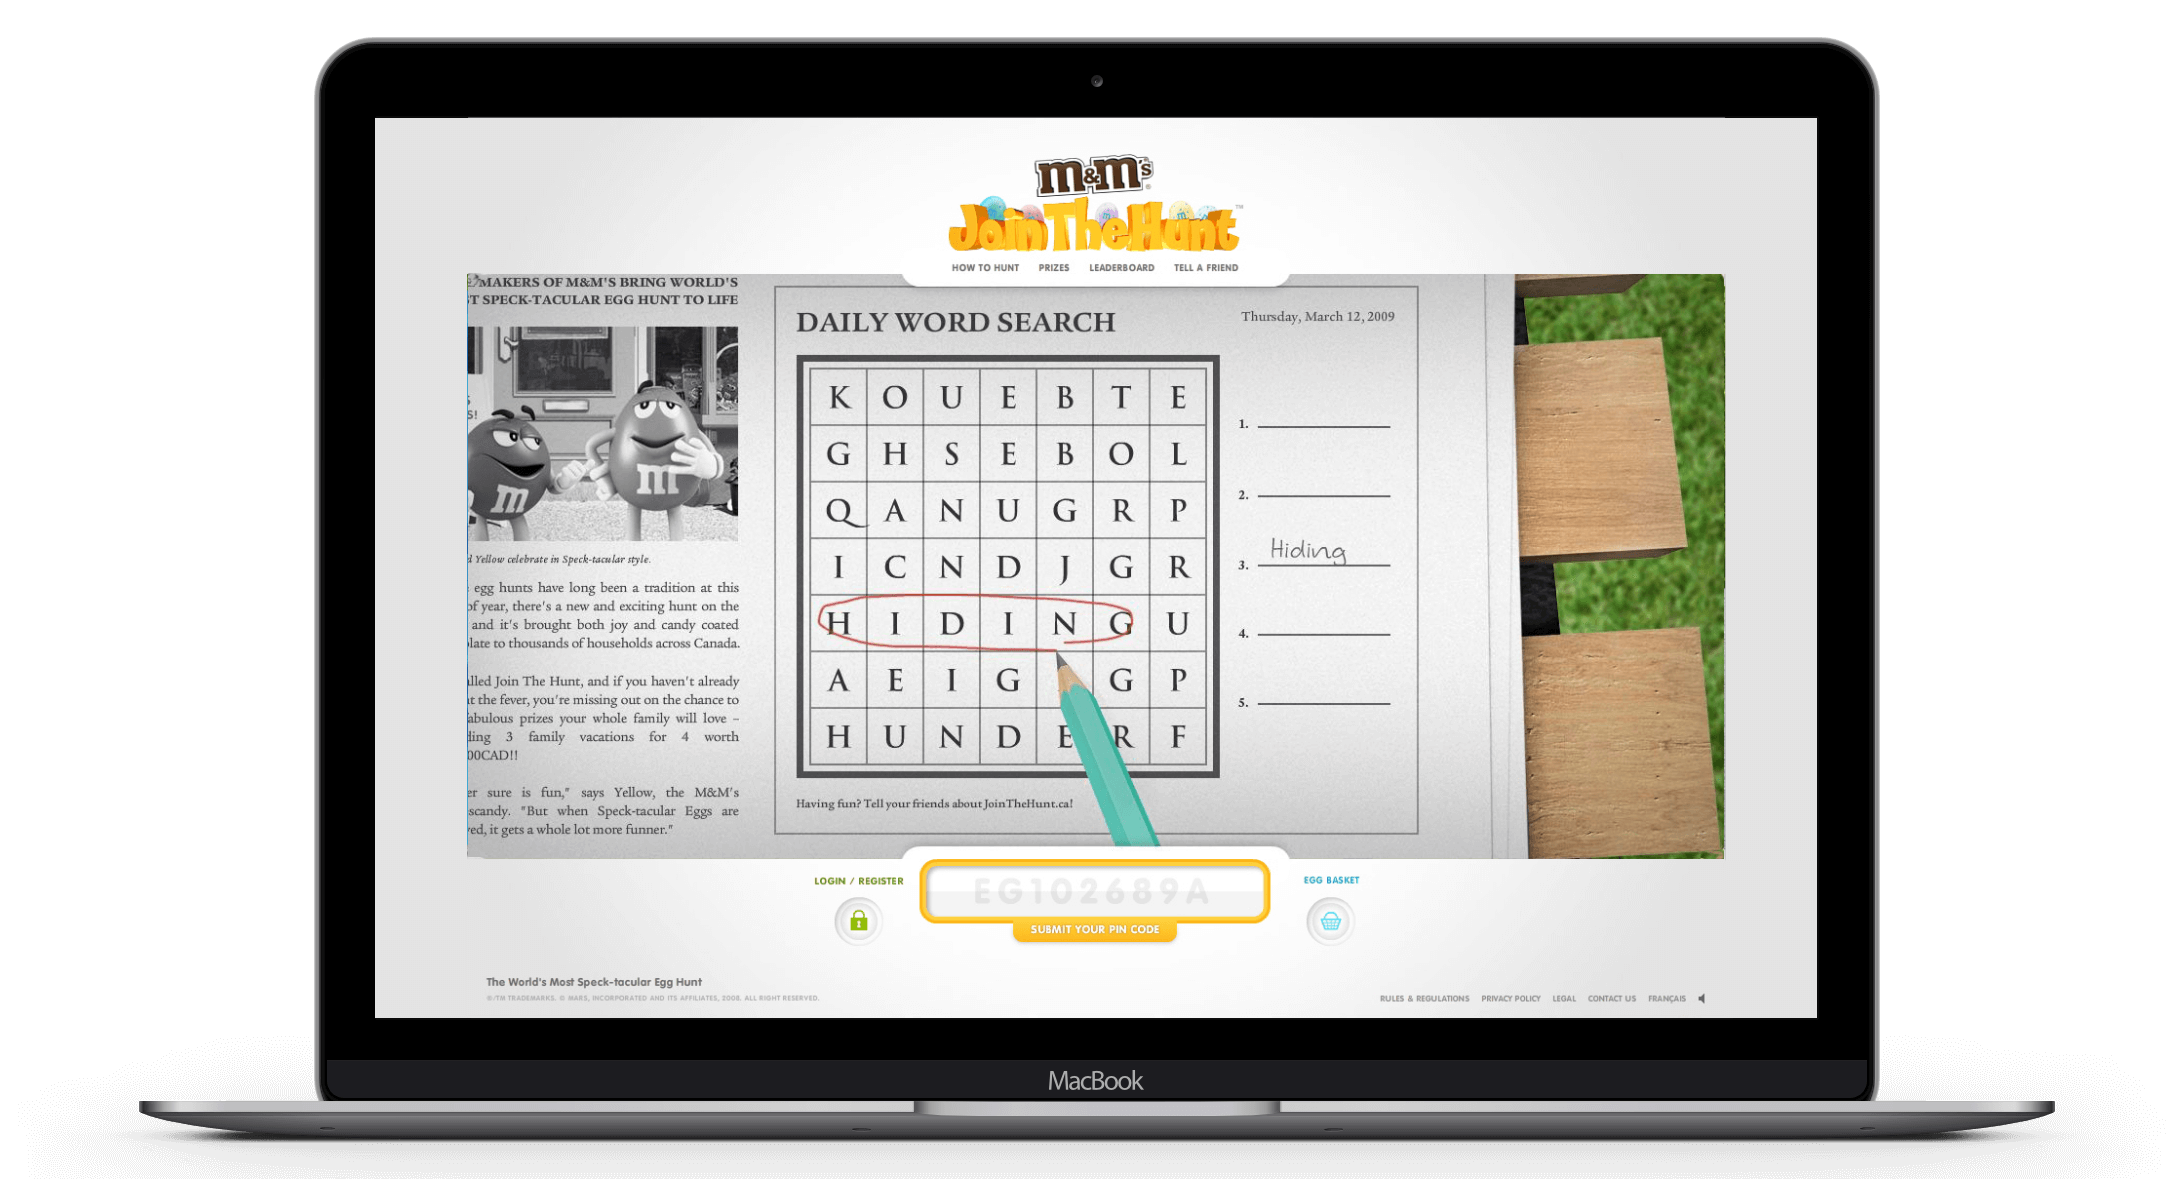 join-the-hunt-laptop-12-wordsearch